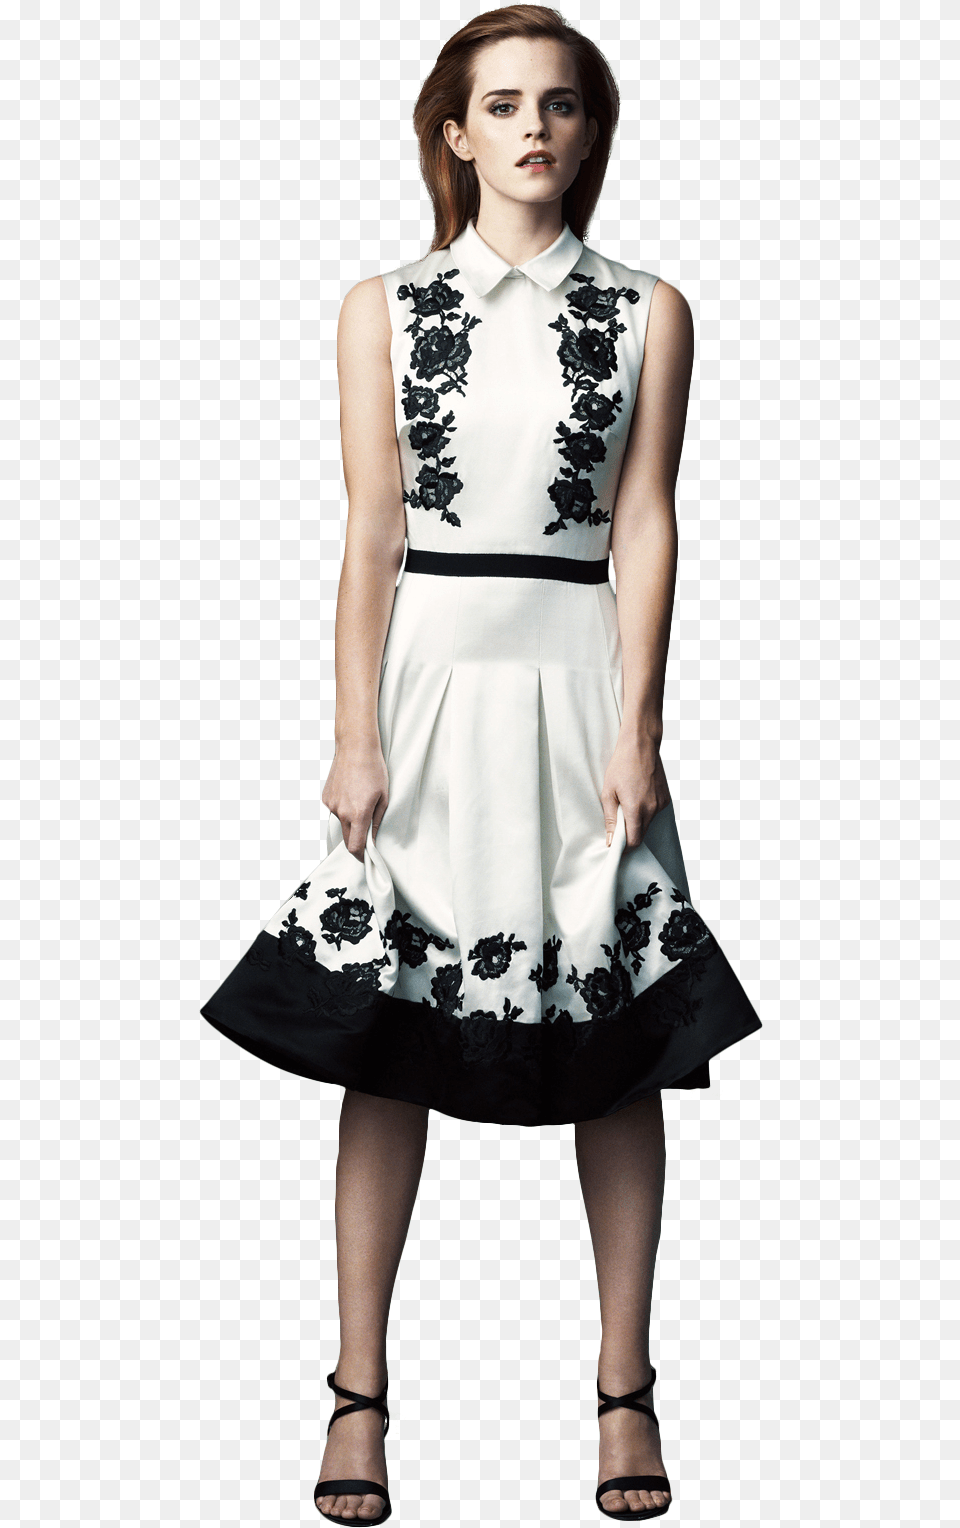 Actress Render By Celebrities Emma Watson Black And White Dress, Clothing, Evening Dress, Formal Wear, Person Png